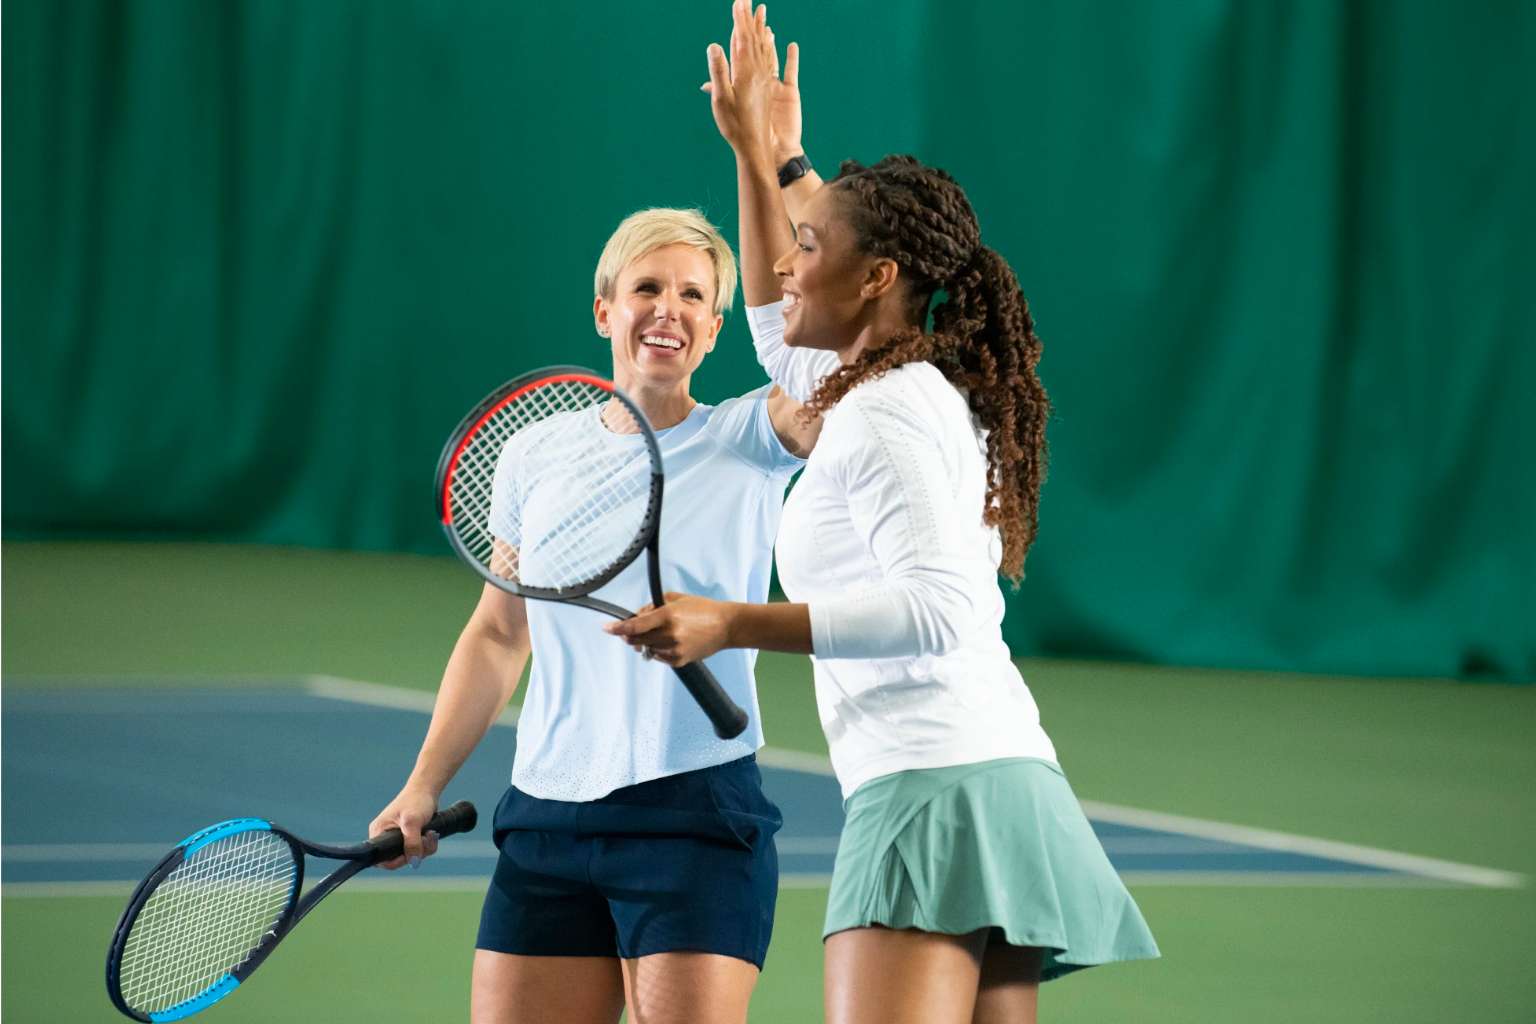 Two smiling women holding racquets and dressed in tennis gear high five on an indoor court